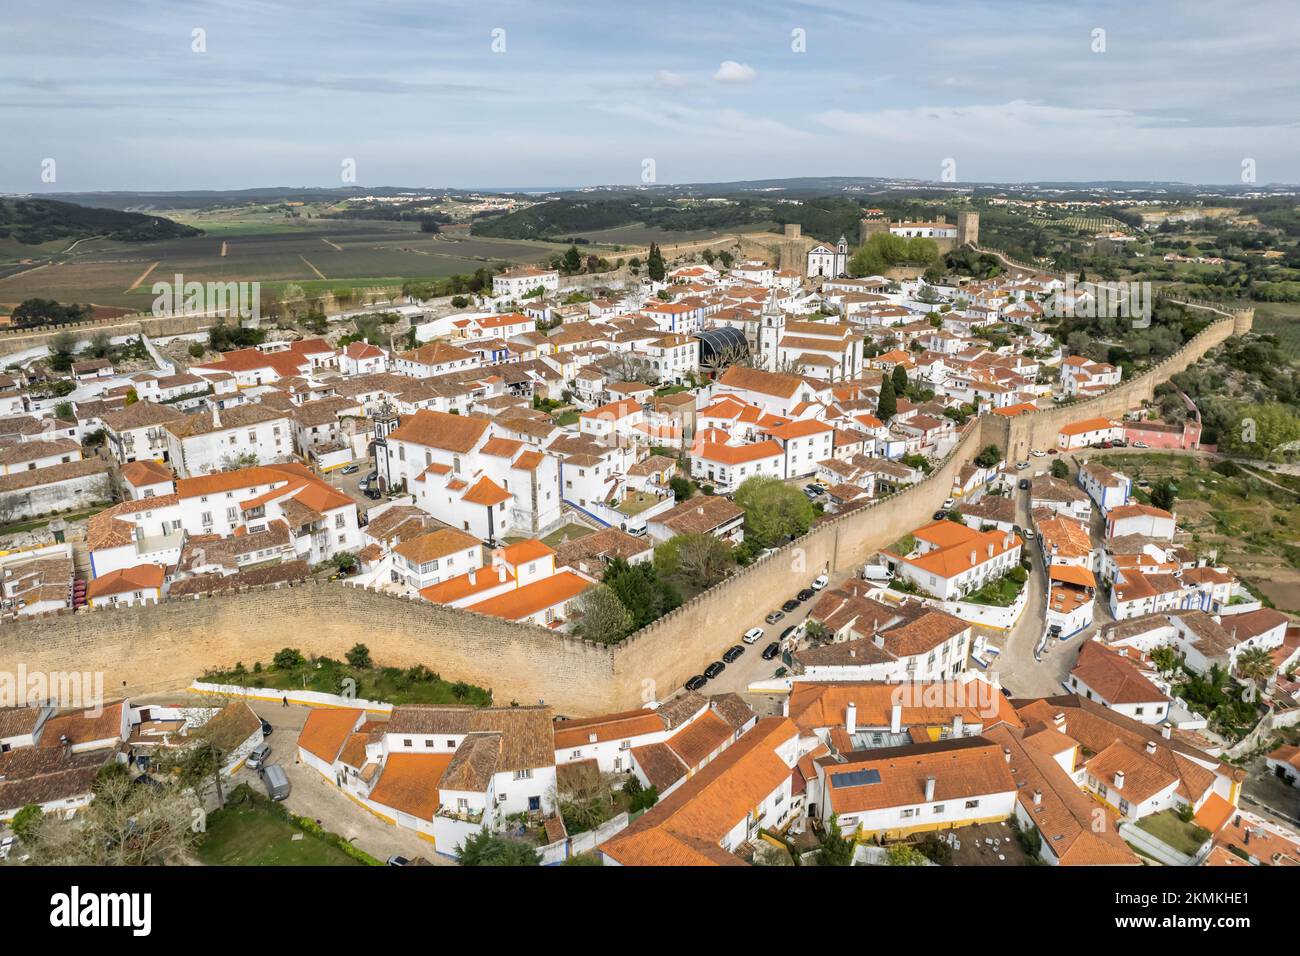 Aerial view of the historic town Obidos, near Peniche, Portugal. Stock Photo